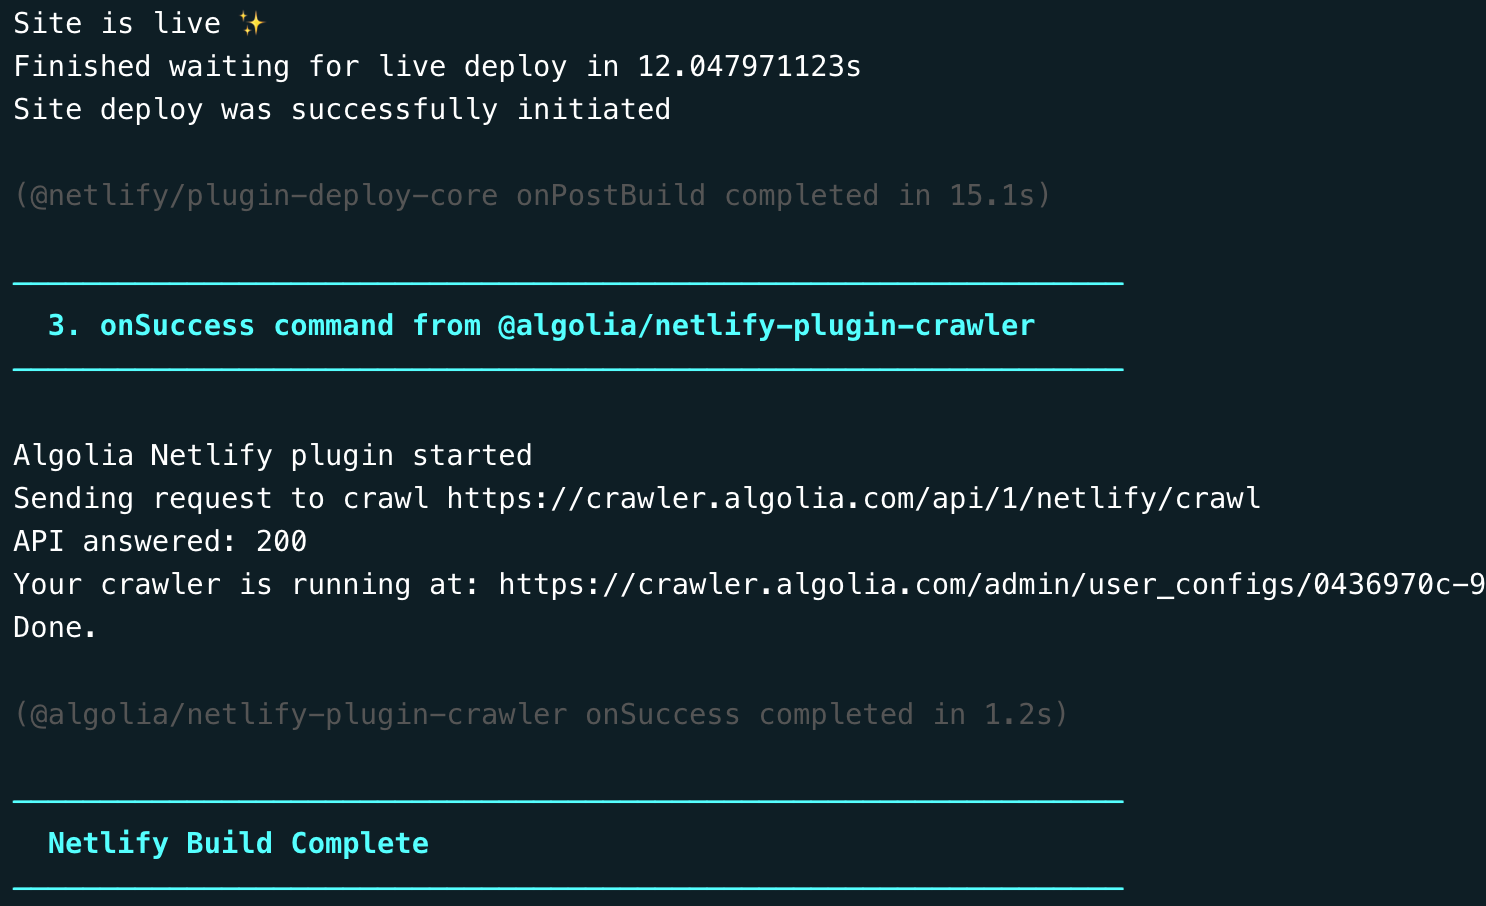 Screenshot of Netlify build logs showing site is live, focused on the logs generated by the Algolia plugin